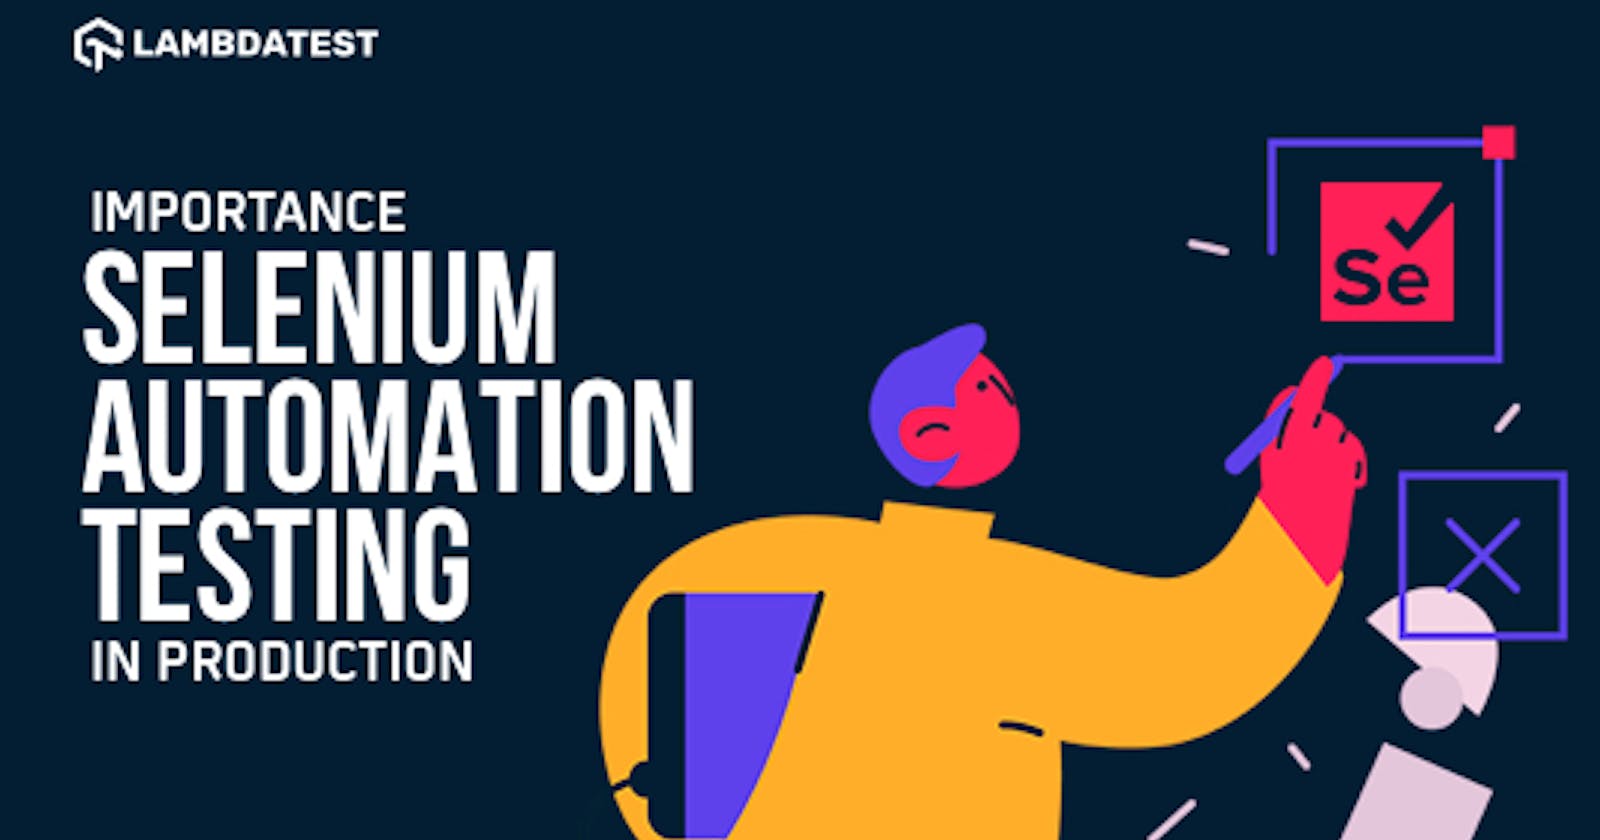 Why Selenium Automation Testing In Production Is Pivotal For Your Next Release?